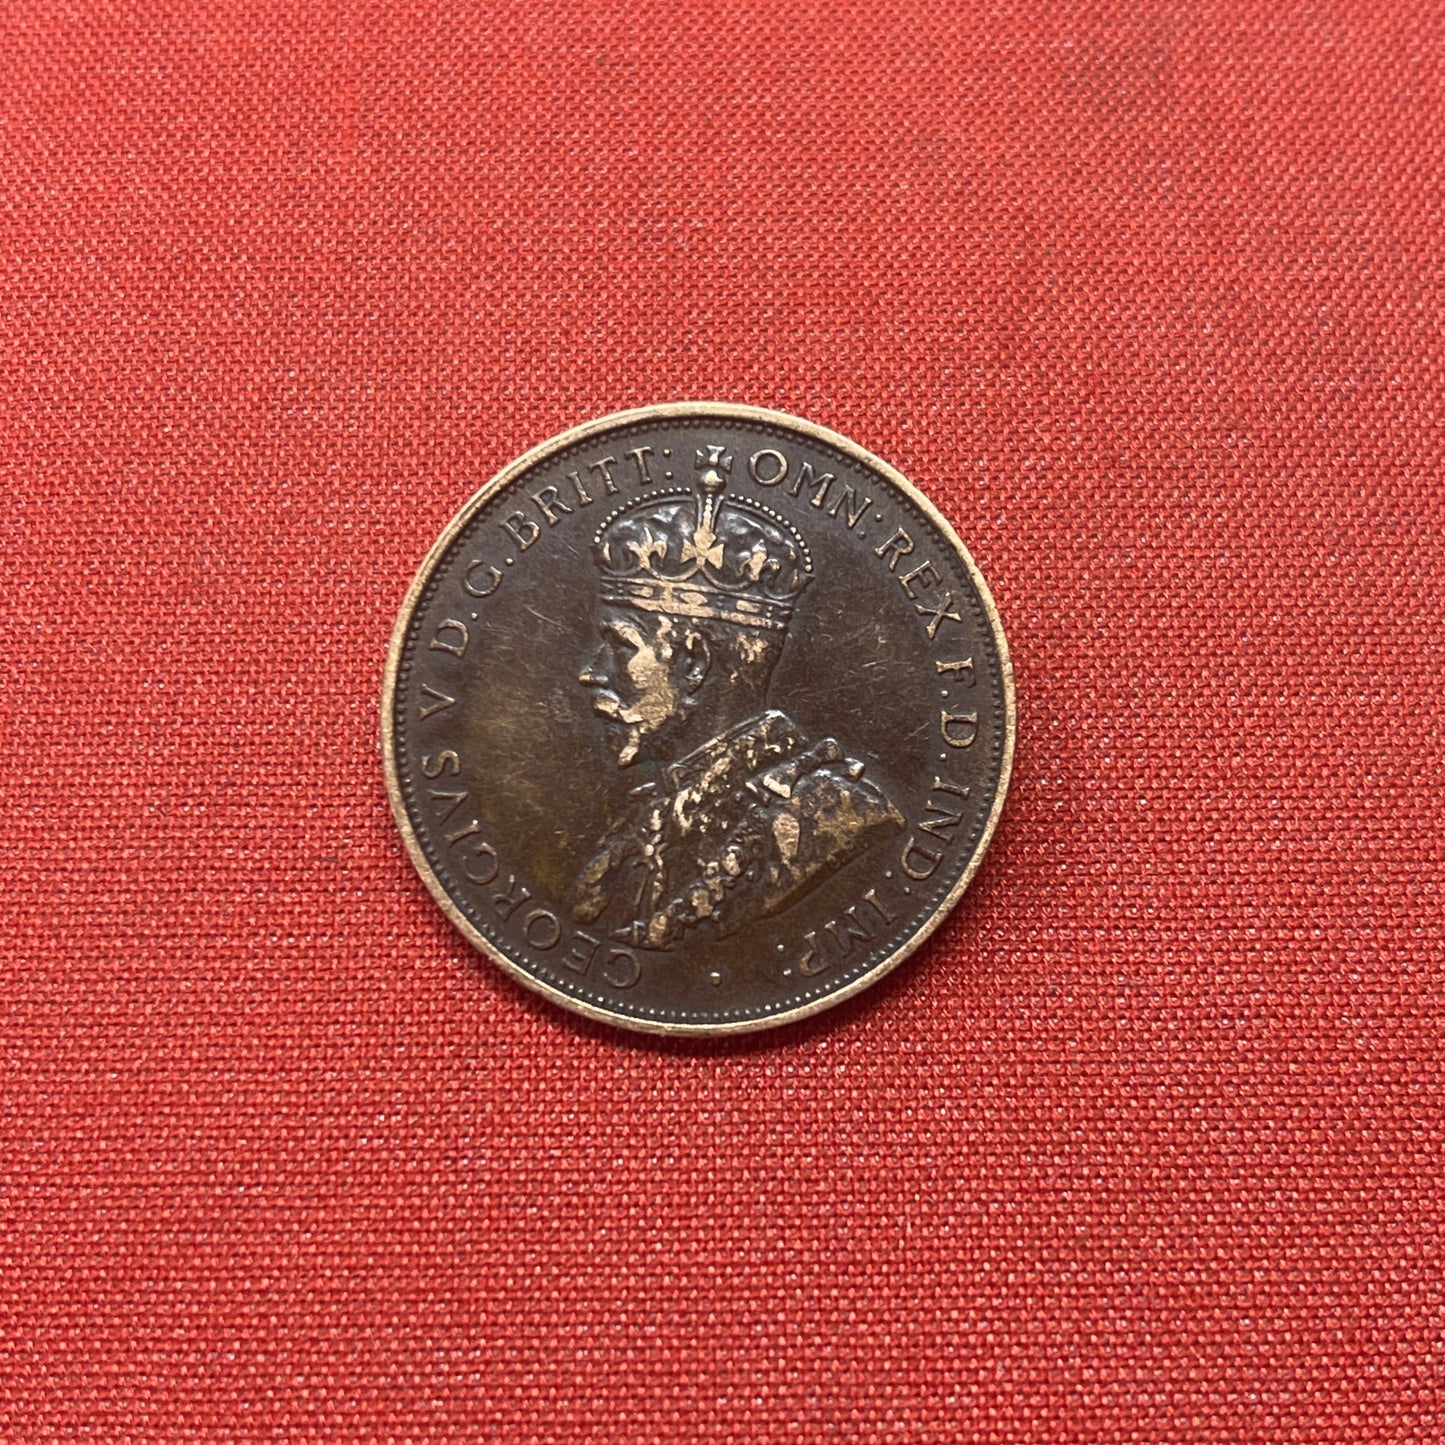 1923 State of Jersey One Twelth Of A Shilling